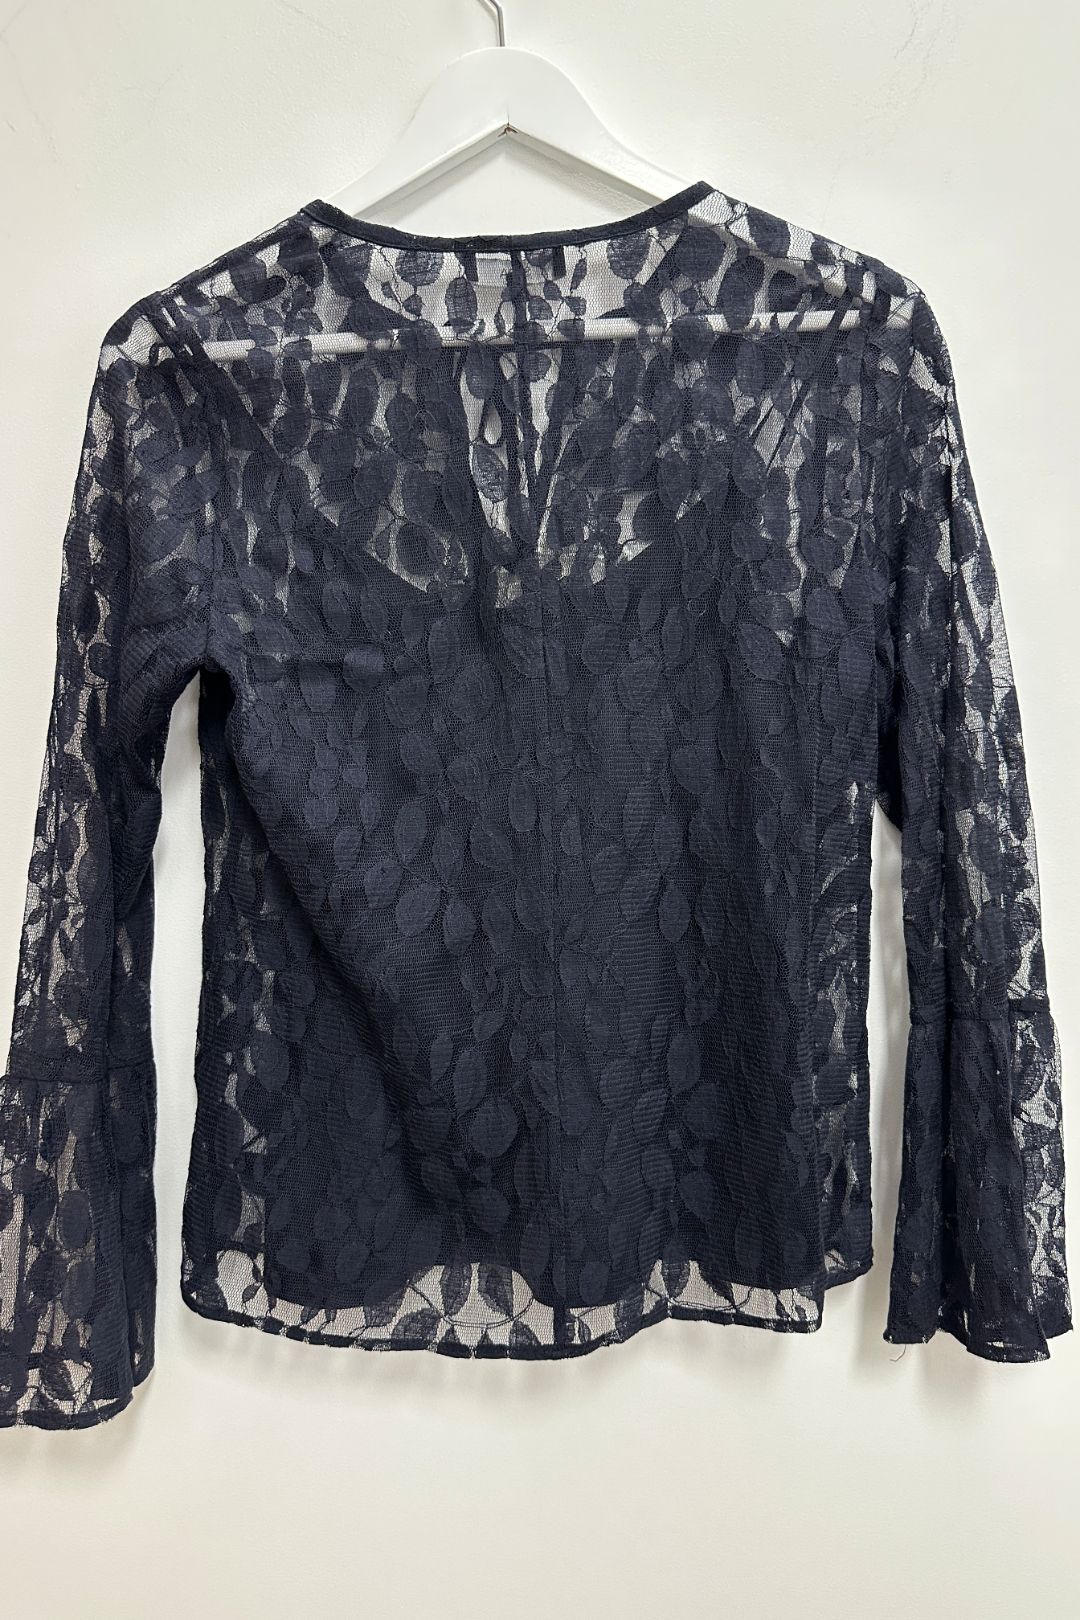 Saba Navy Leaf Lace Sheer Shirt with Cami